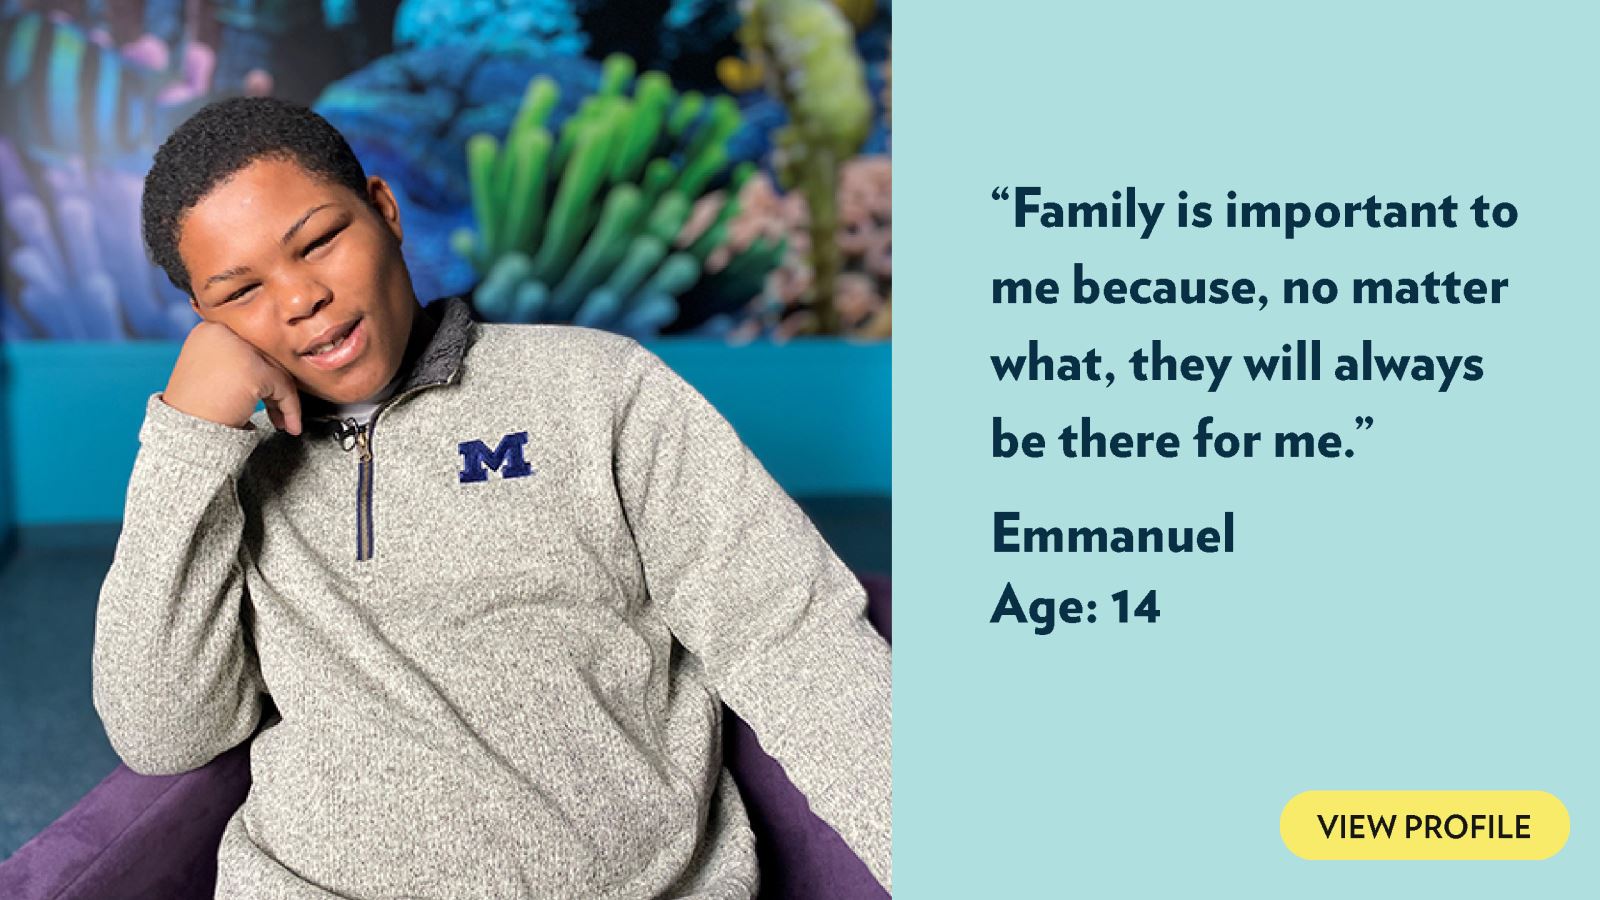 Family is important to me because, no matter what, they will always be there for me. Emmanuel, age 14. View profile.